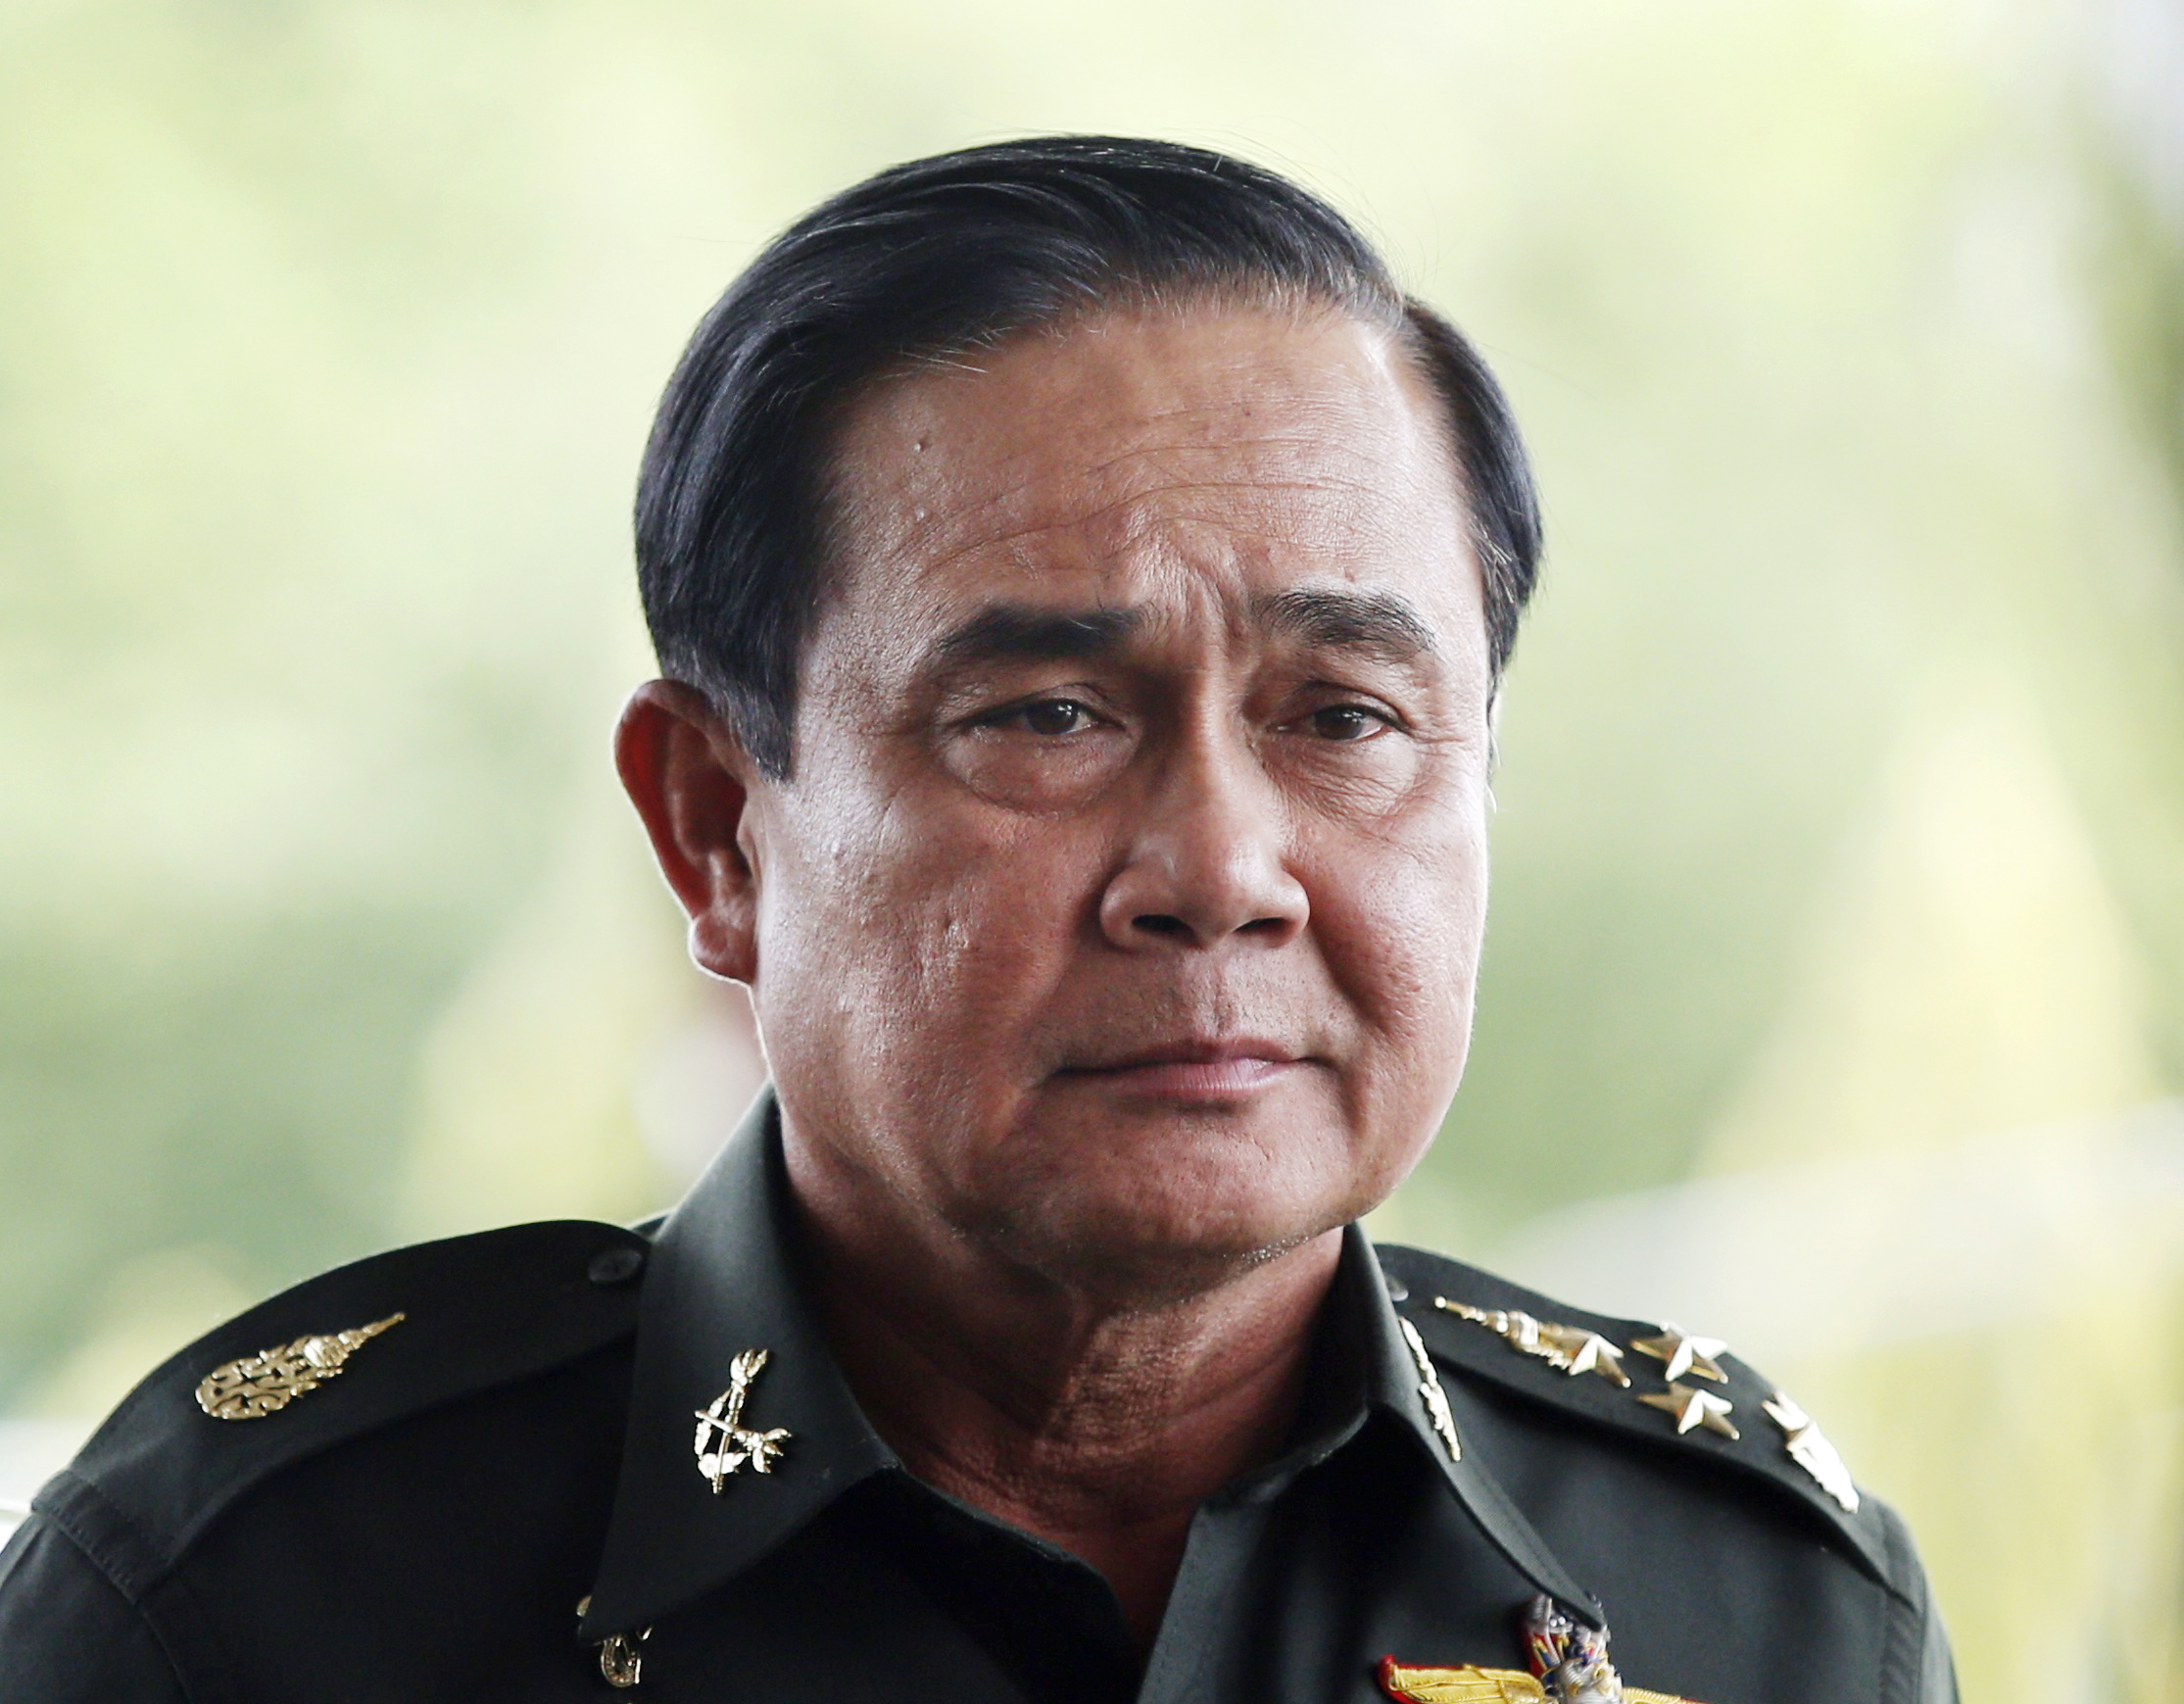 Thai army chief General Prayuth Chan-ocha arrives to give a news conference at the Army Club in Bangkok on May 20, 2014 (Athit Perawongmetha—Reuters)